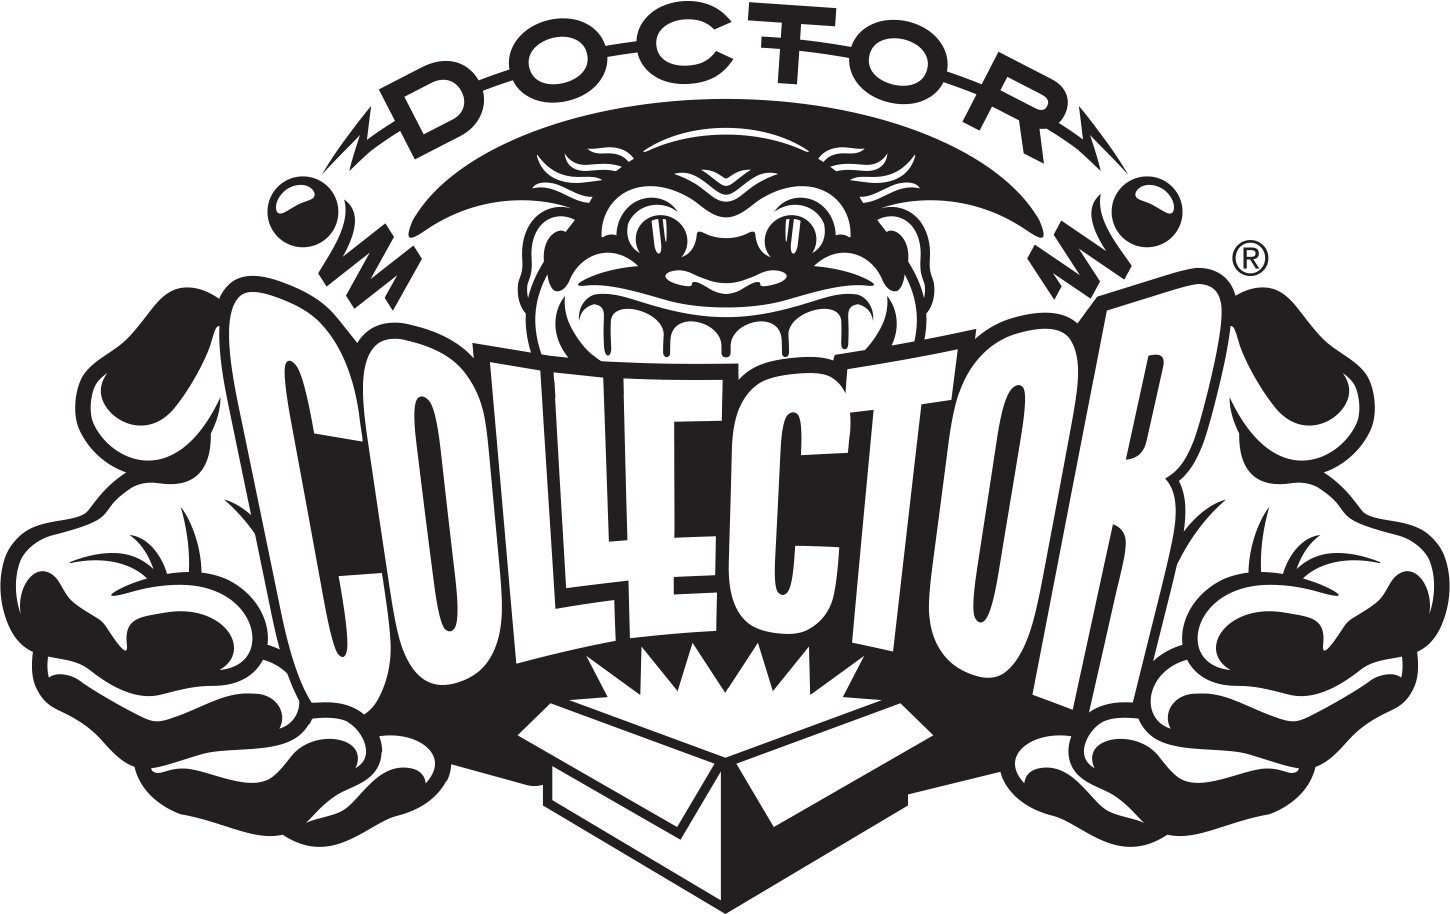 DOCTOR COLLECTOR_WHITE